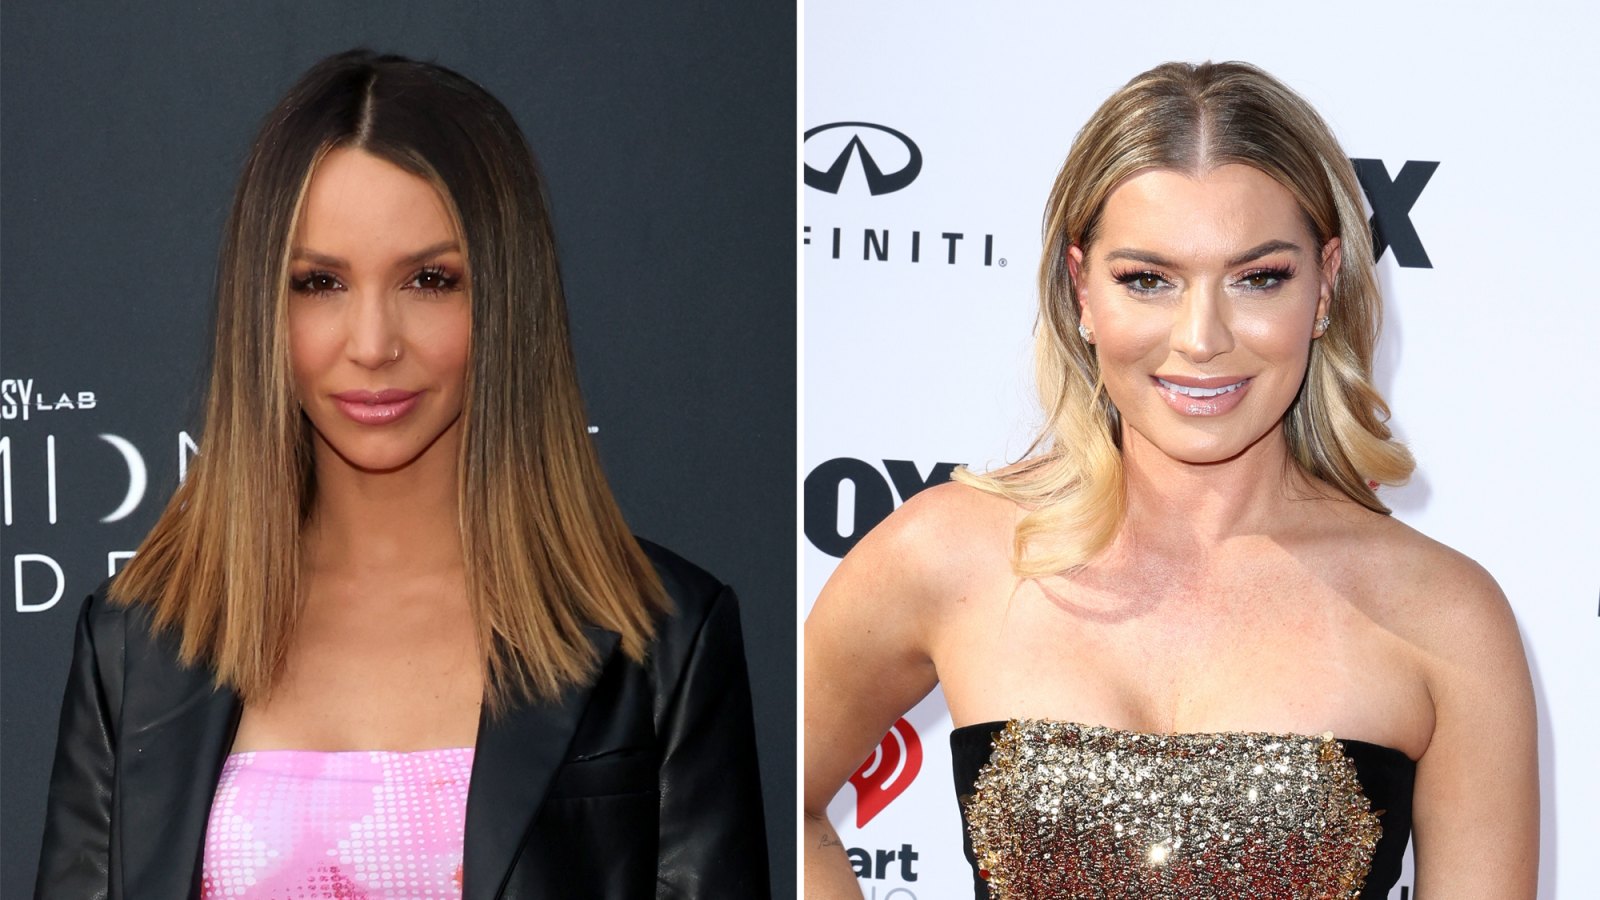 Scheana Shay Claims Lindsay Hubbard Calling Photographers on Them After Scandoval Always Does That